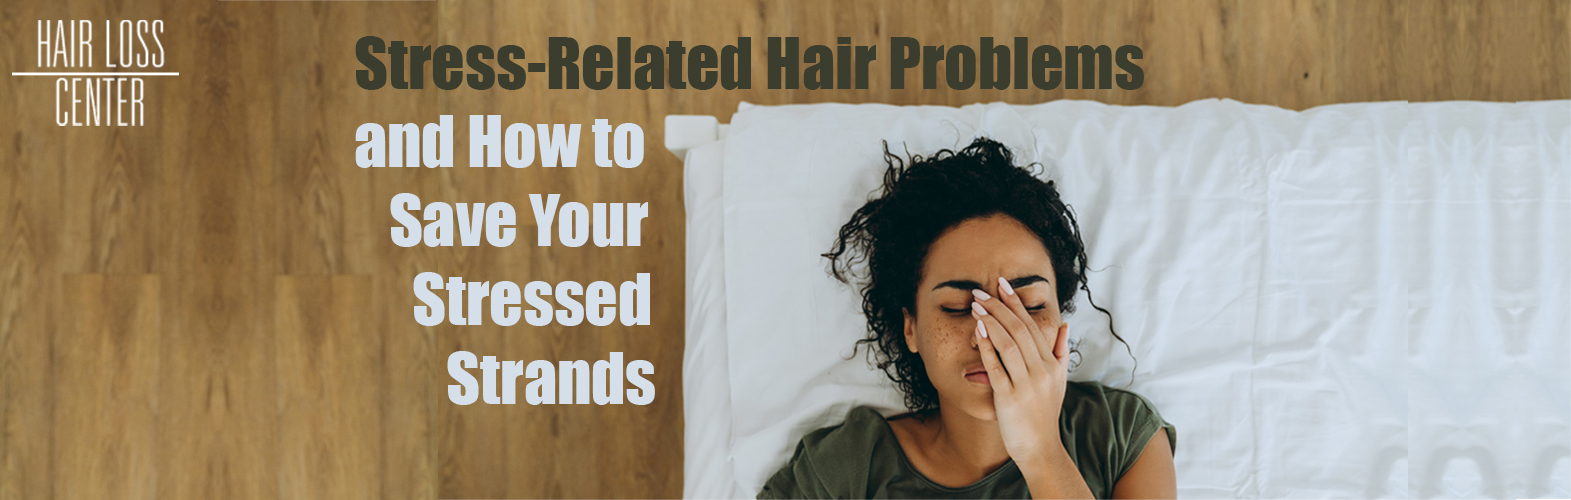 Stress-Related Hair Problems and How to Save Your Stressed Strands 